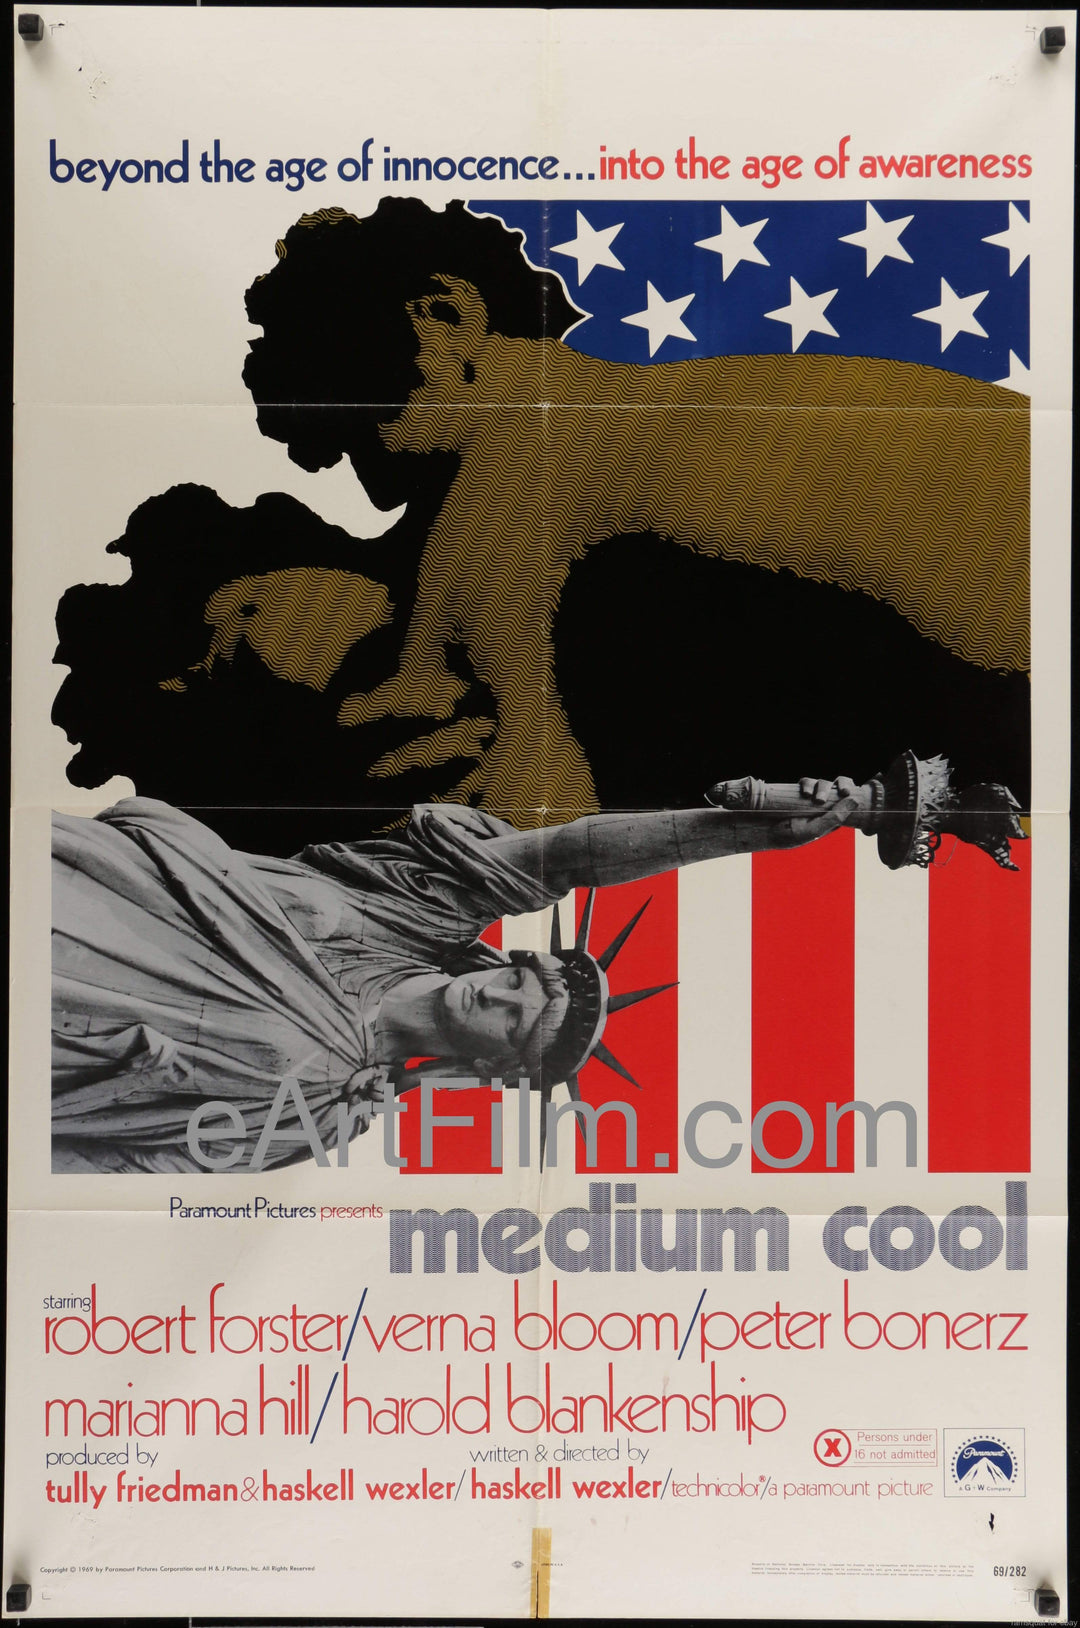 eArtFilm.com U.S One Sheet (27"x41") Rated "X" Medium Cool-Haskell Wexler-Robert Forster-Verna Bloom-X Rated Classic-1968-27x41